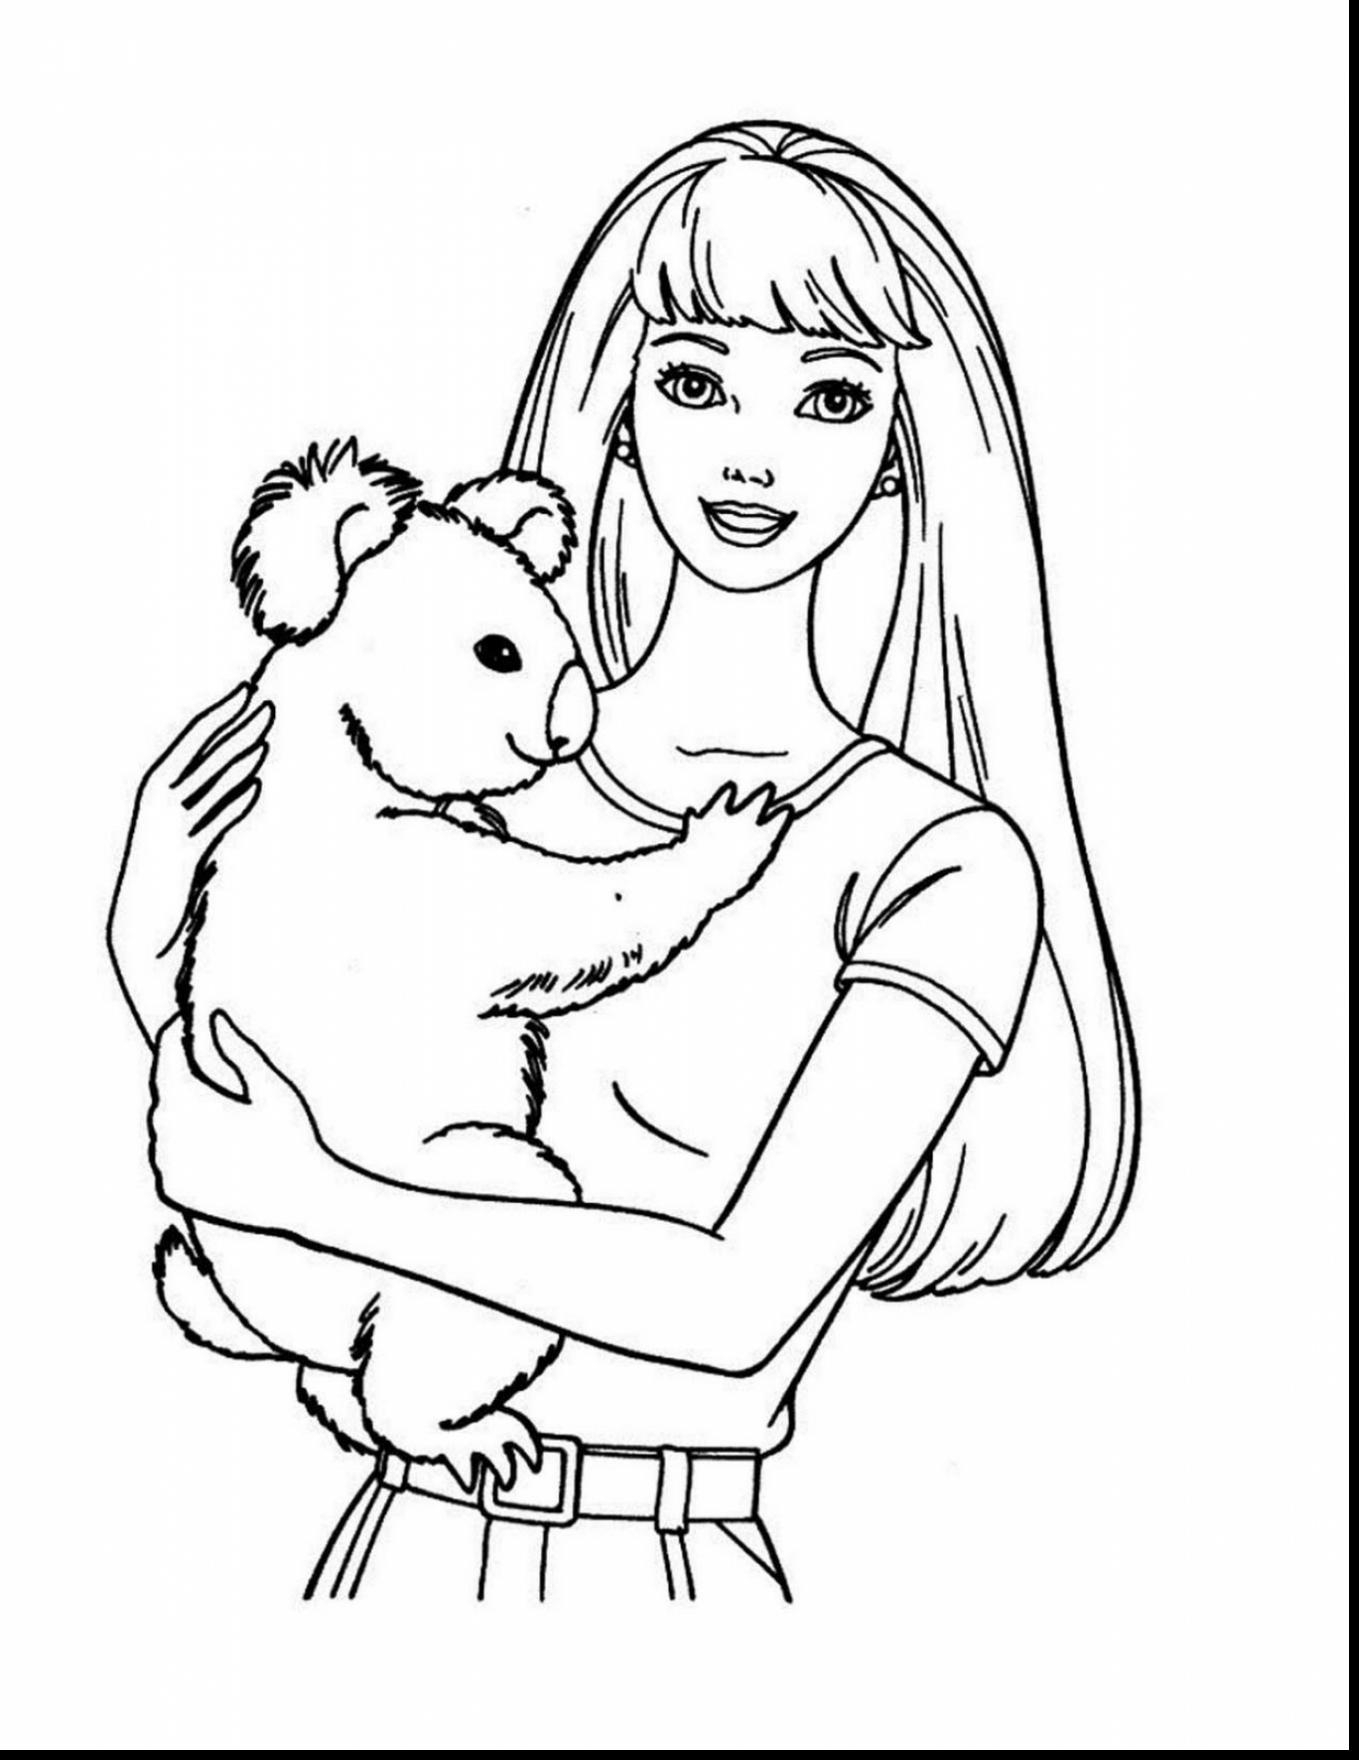 Barbie Face Coloring Pages at GetColorings.com   Free ...